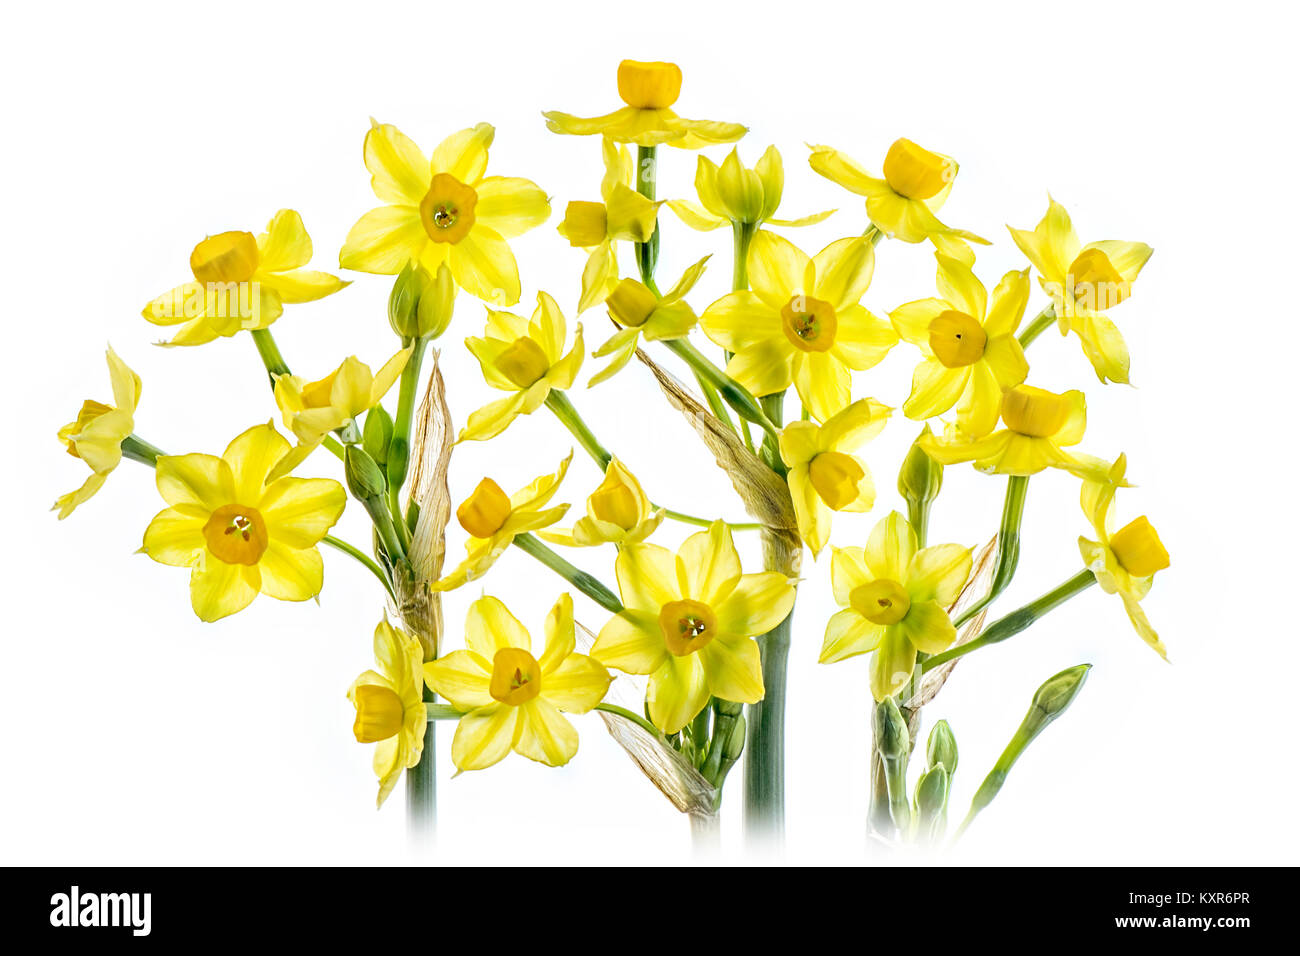 Close-up, high-key image of spring daffodils against a white background Stock Photo